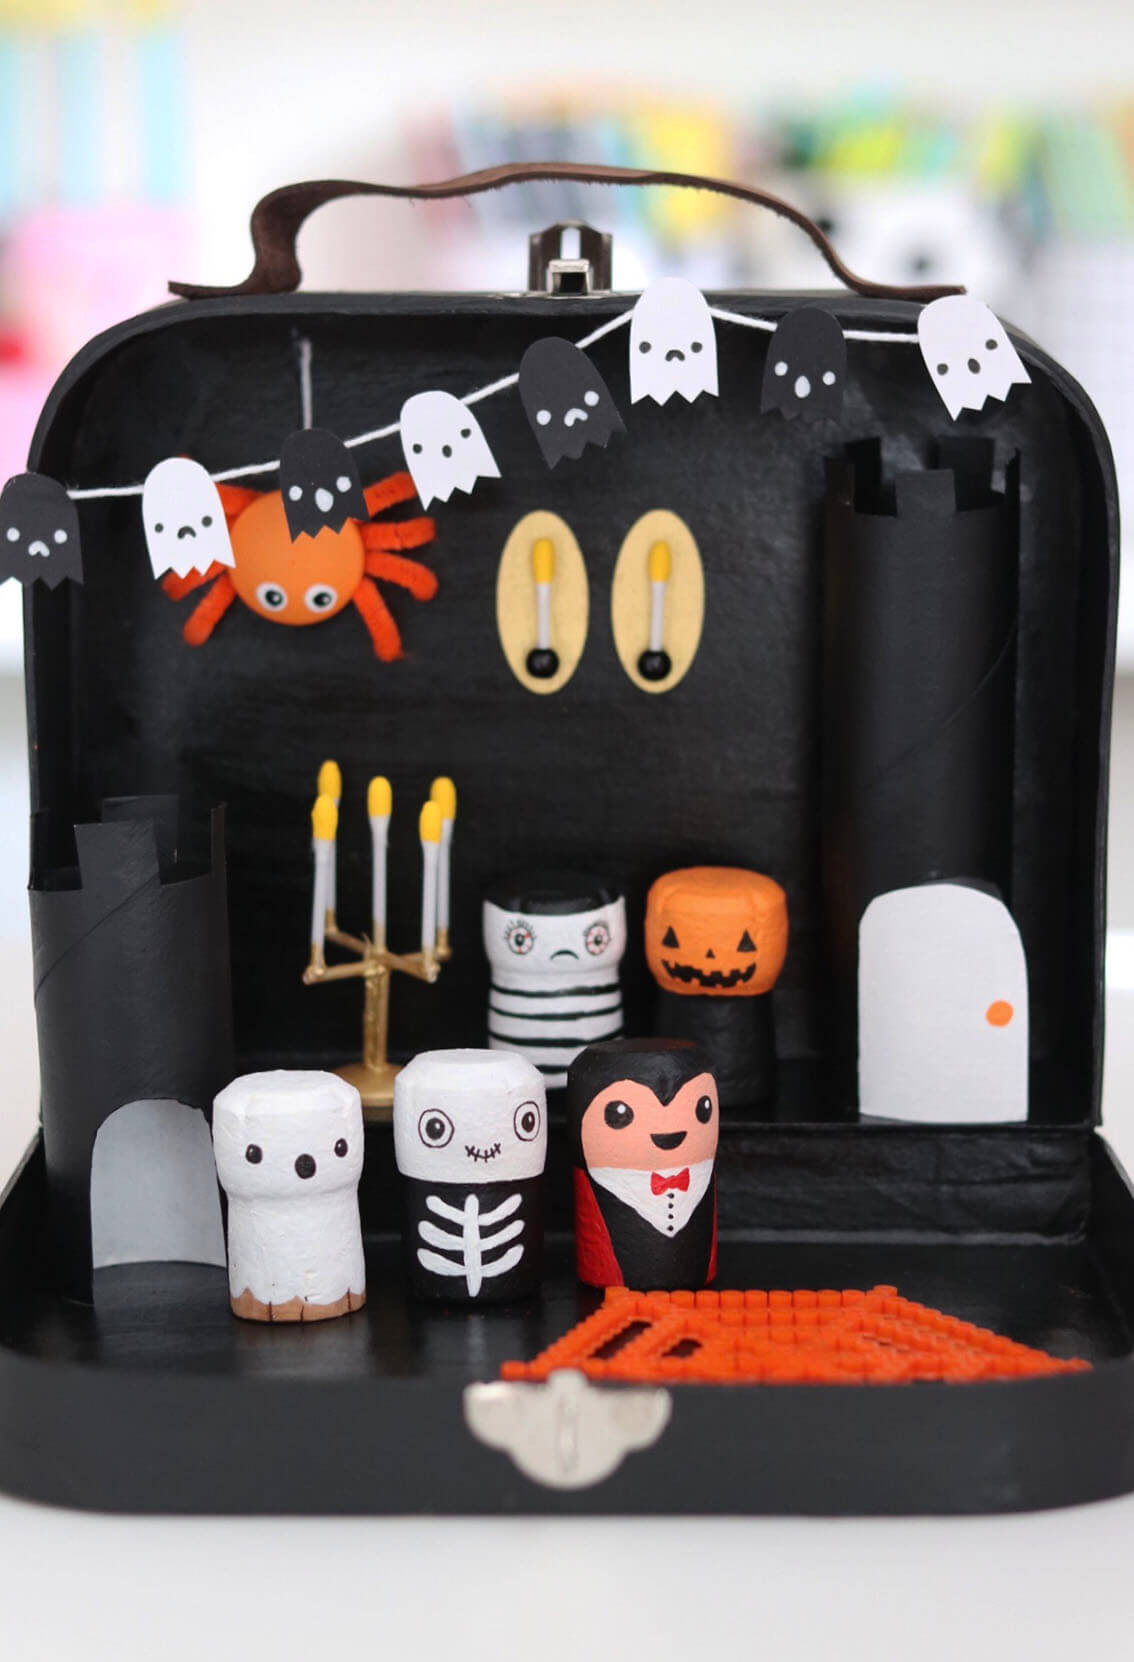 Halloween Gothic Town Cork Character Craft For Kids 